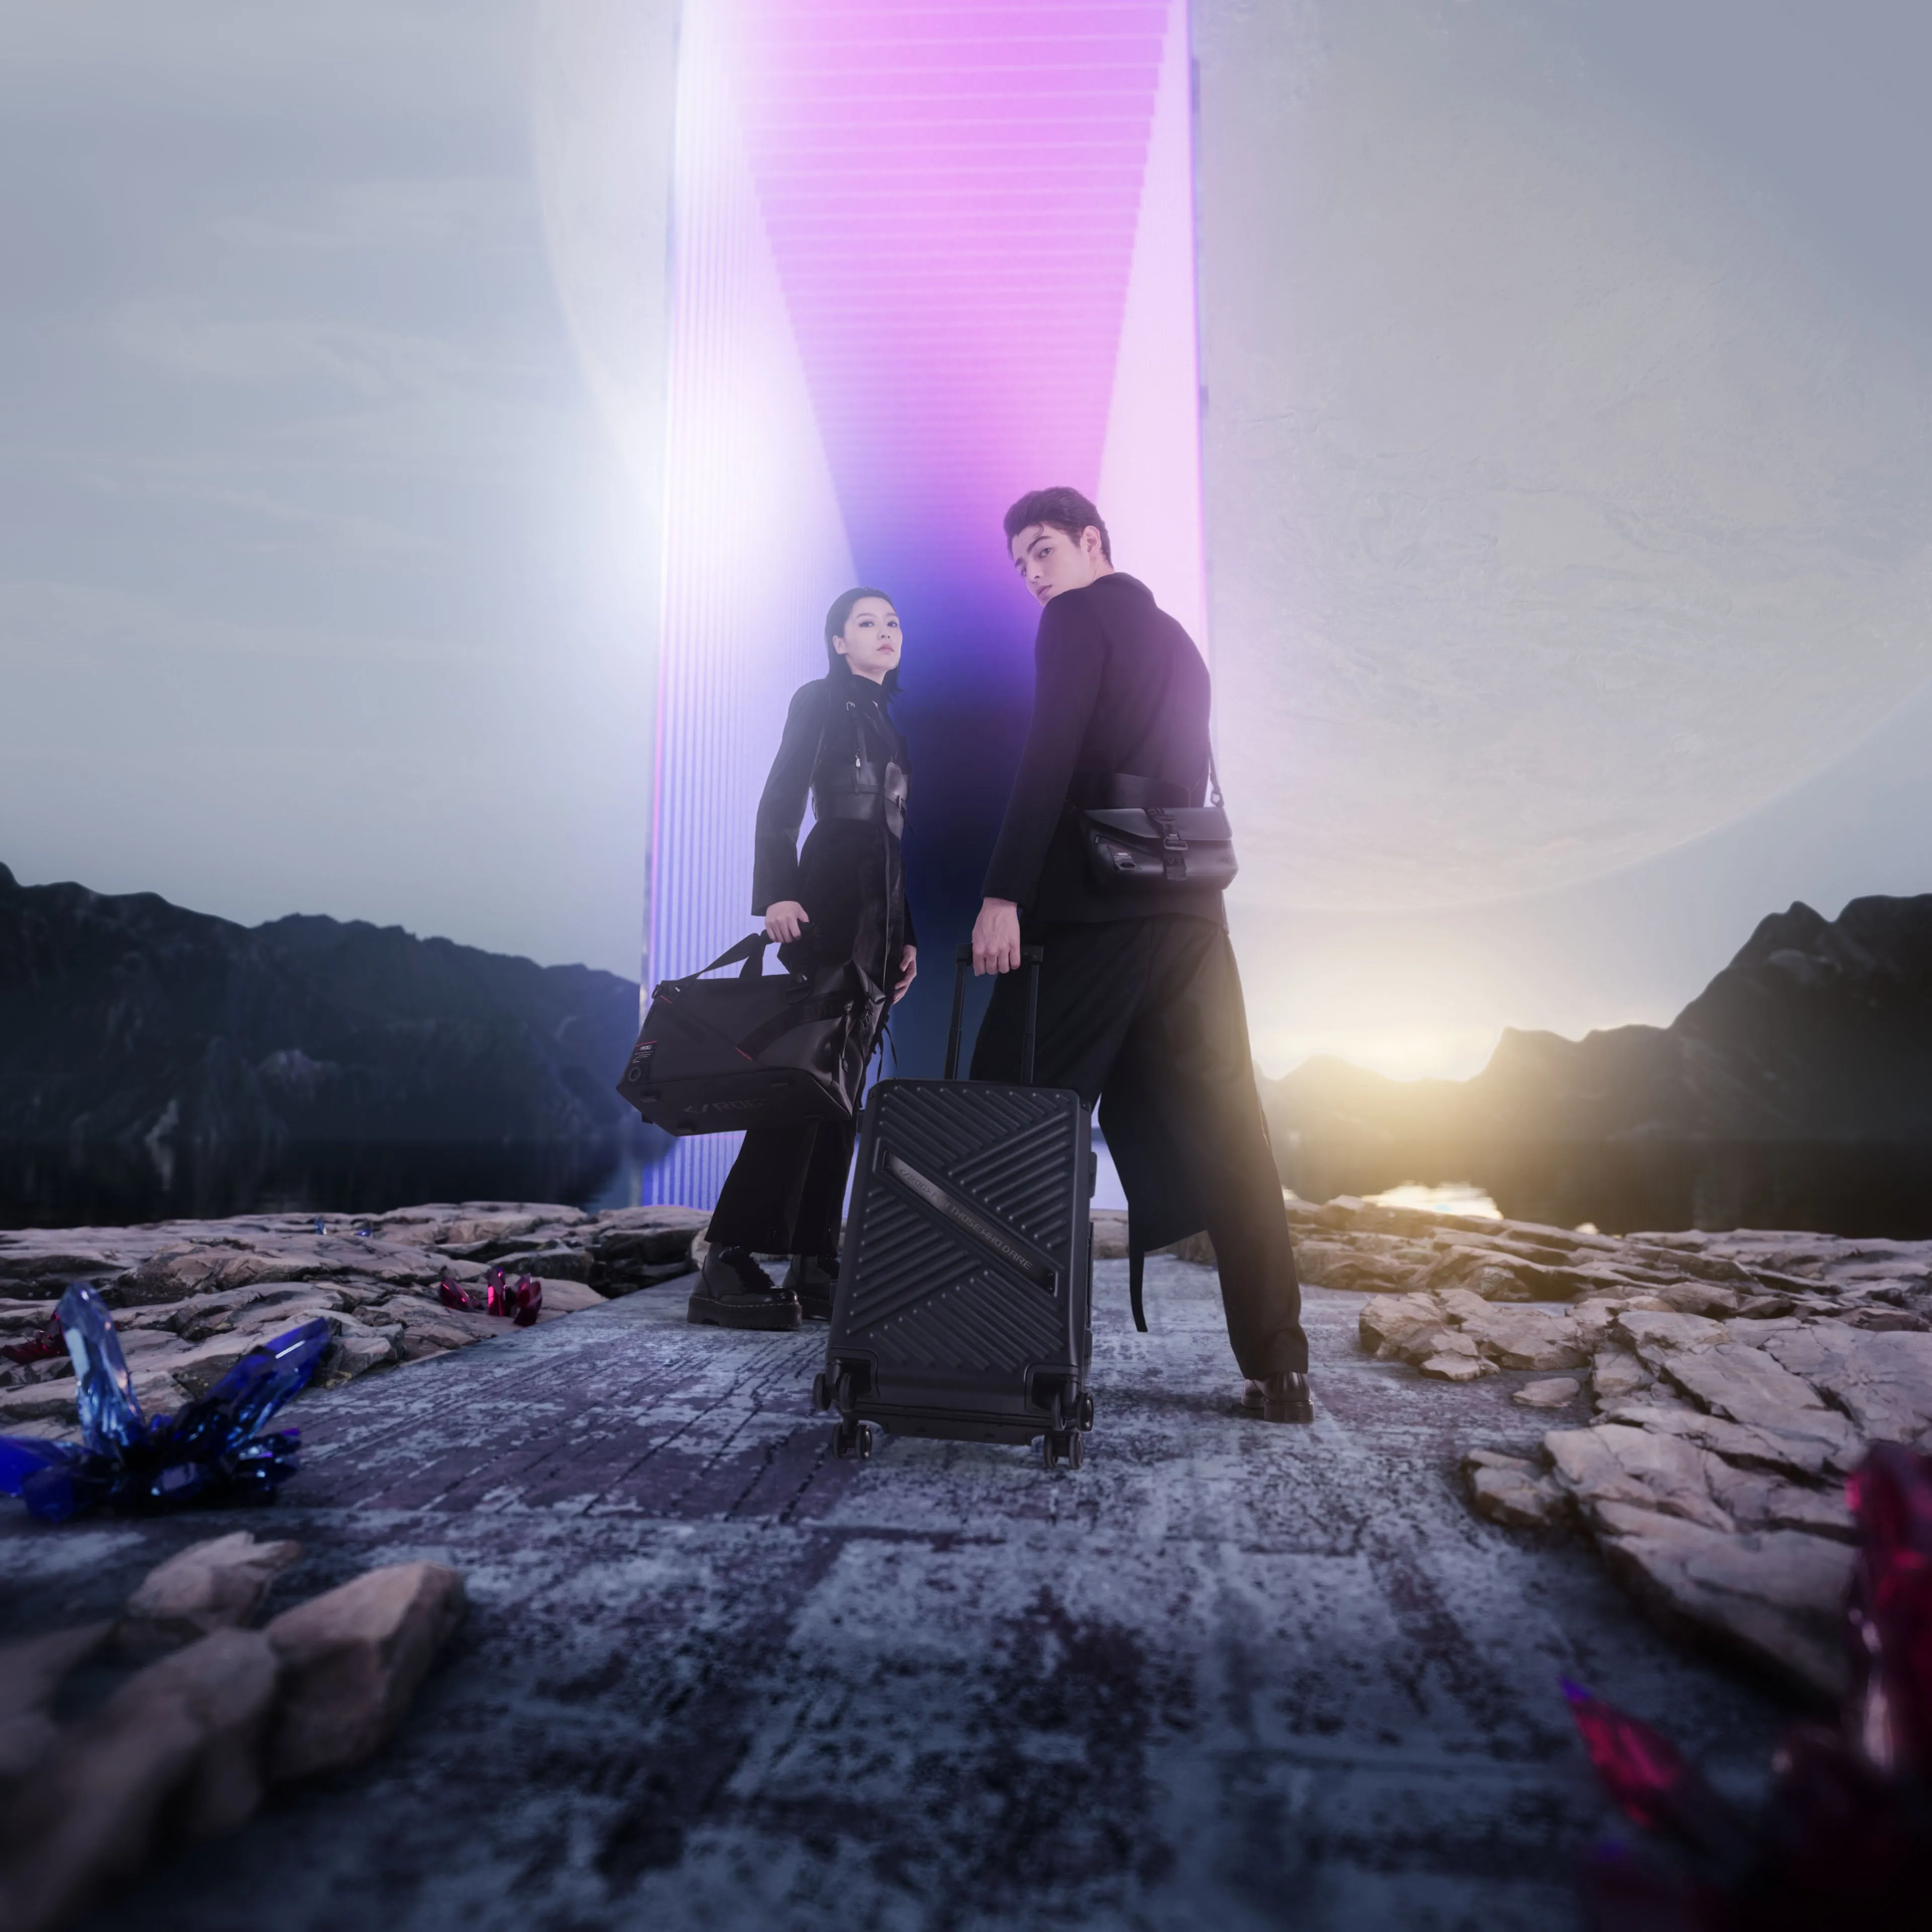 Two people, one wearing the ROG SLASH Sling Bag 2.0 and pulling the Hard Case Luggage, with another holding the Duffle Bag, in a grey landscape with a purple monolith and moon in the background